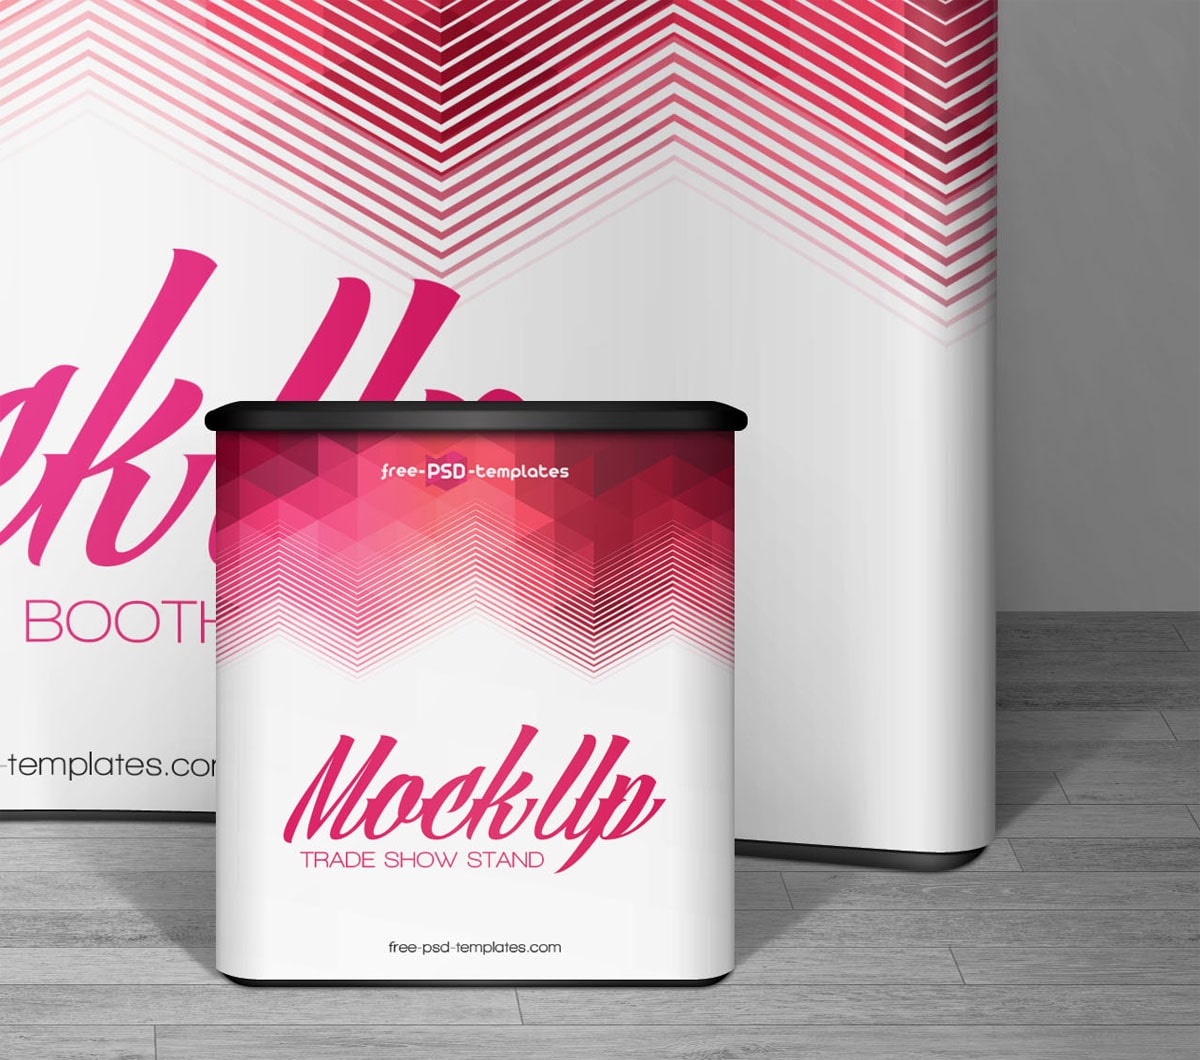 Download Free Trade Show Booth Mockup - Find the Perfect Creative ...